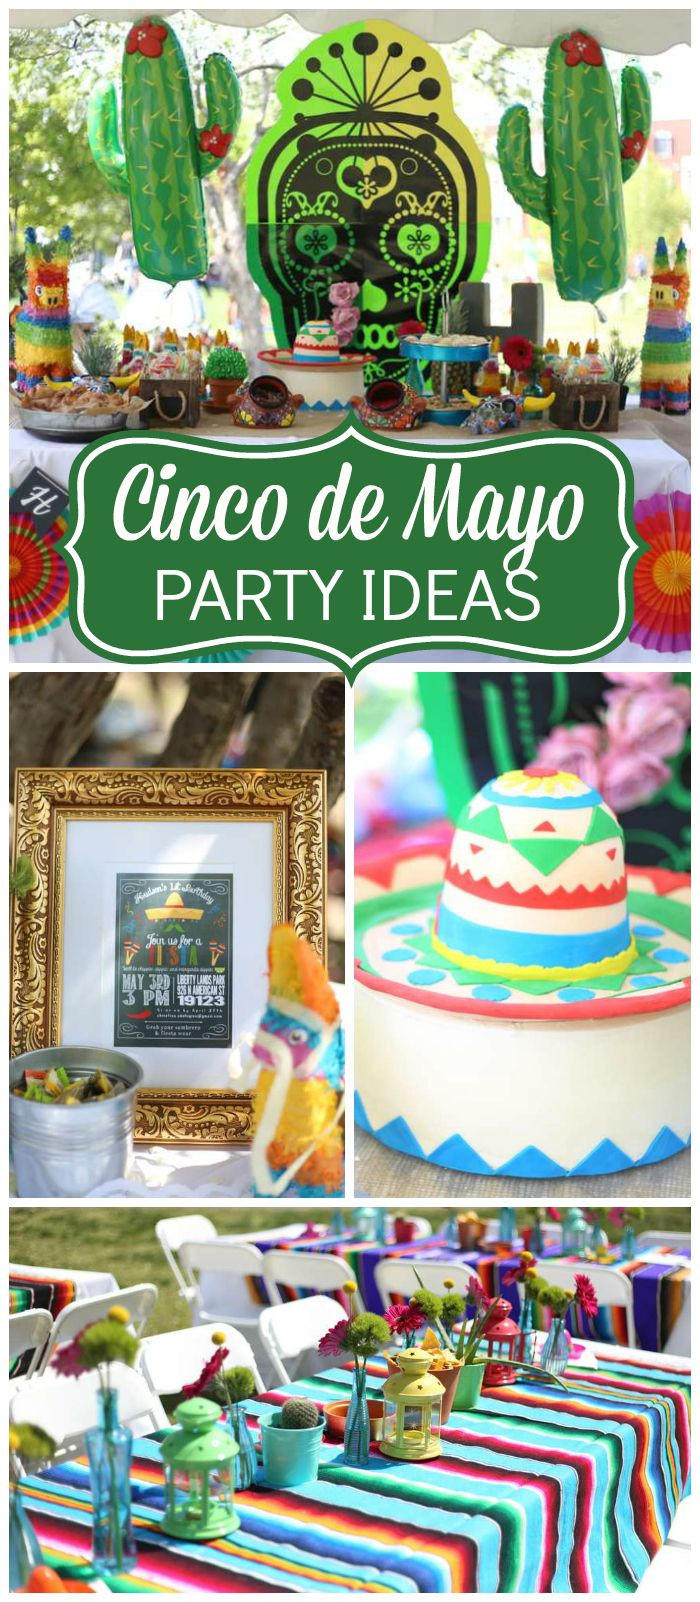 Cinco De Mayo Themed Party
 Check out this Cinco de Mayo party with a taco bar and